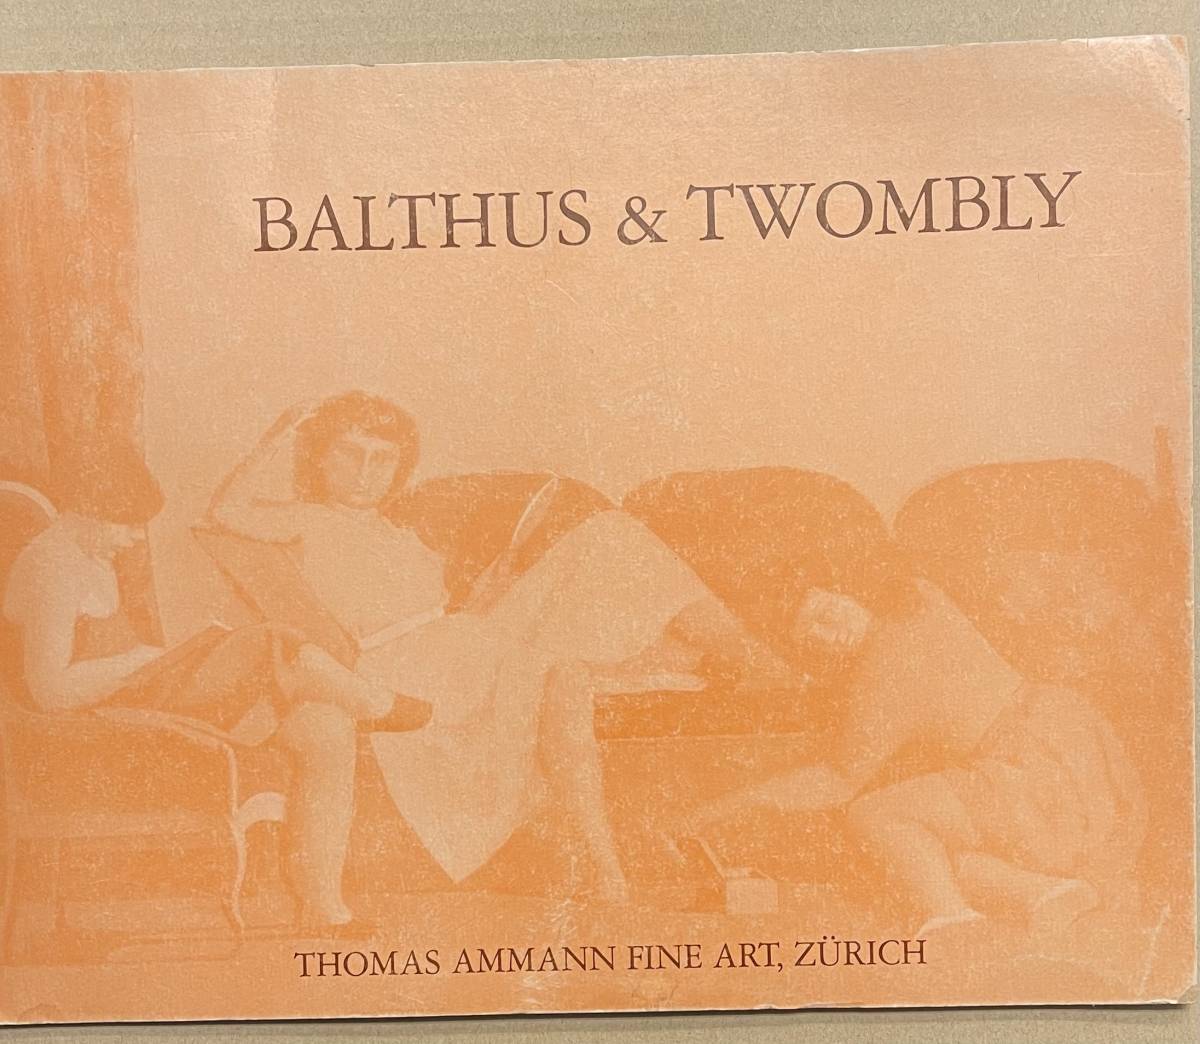 BALTHUS & TWOMBLY バルテュス サイ・トゥオンブリー CY TWOMBLY